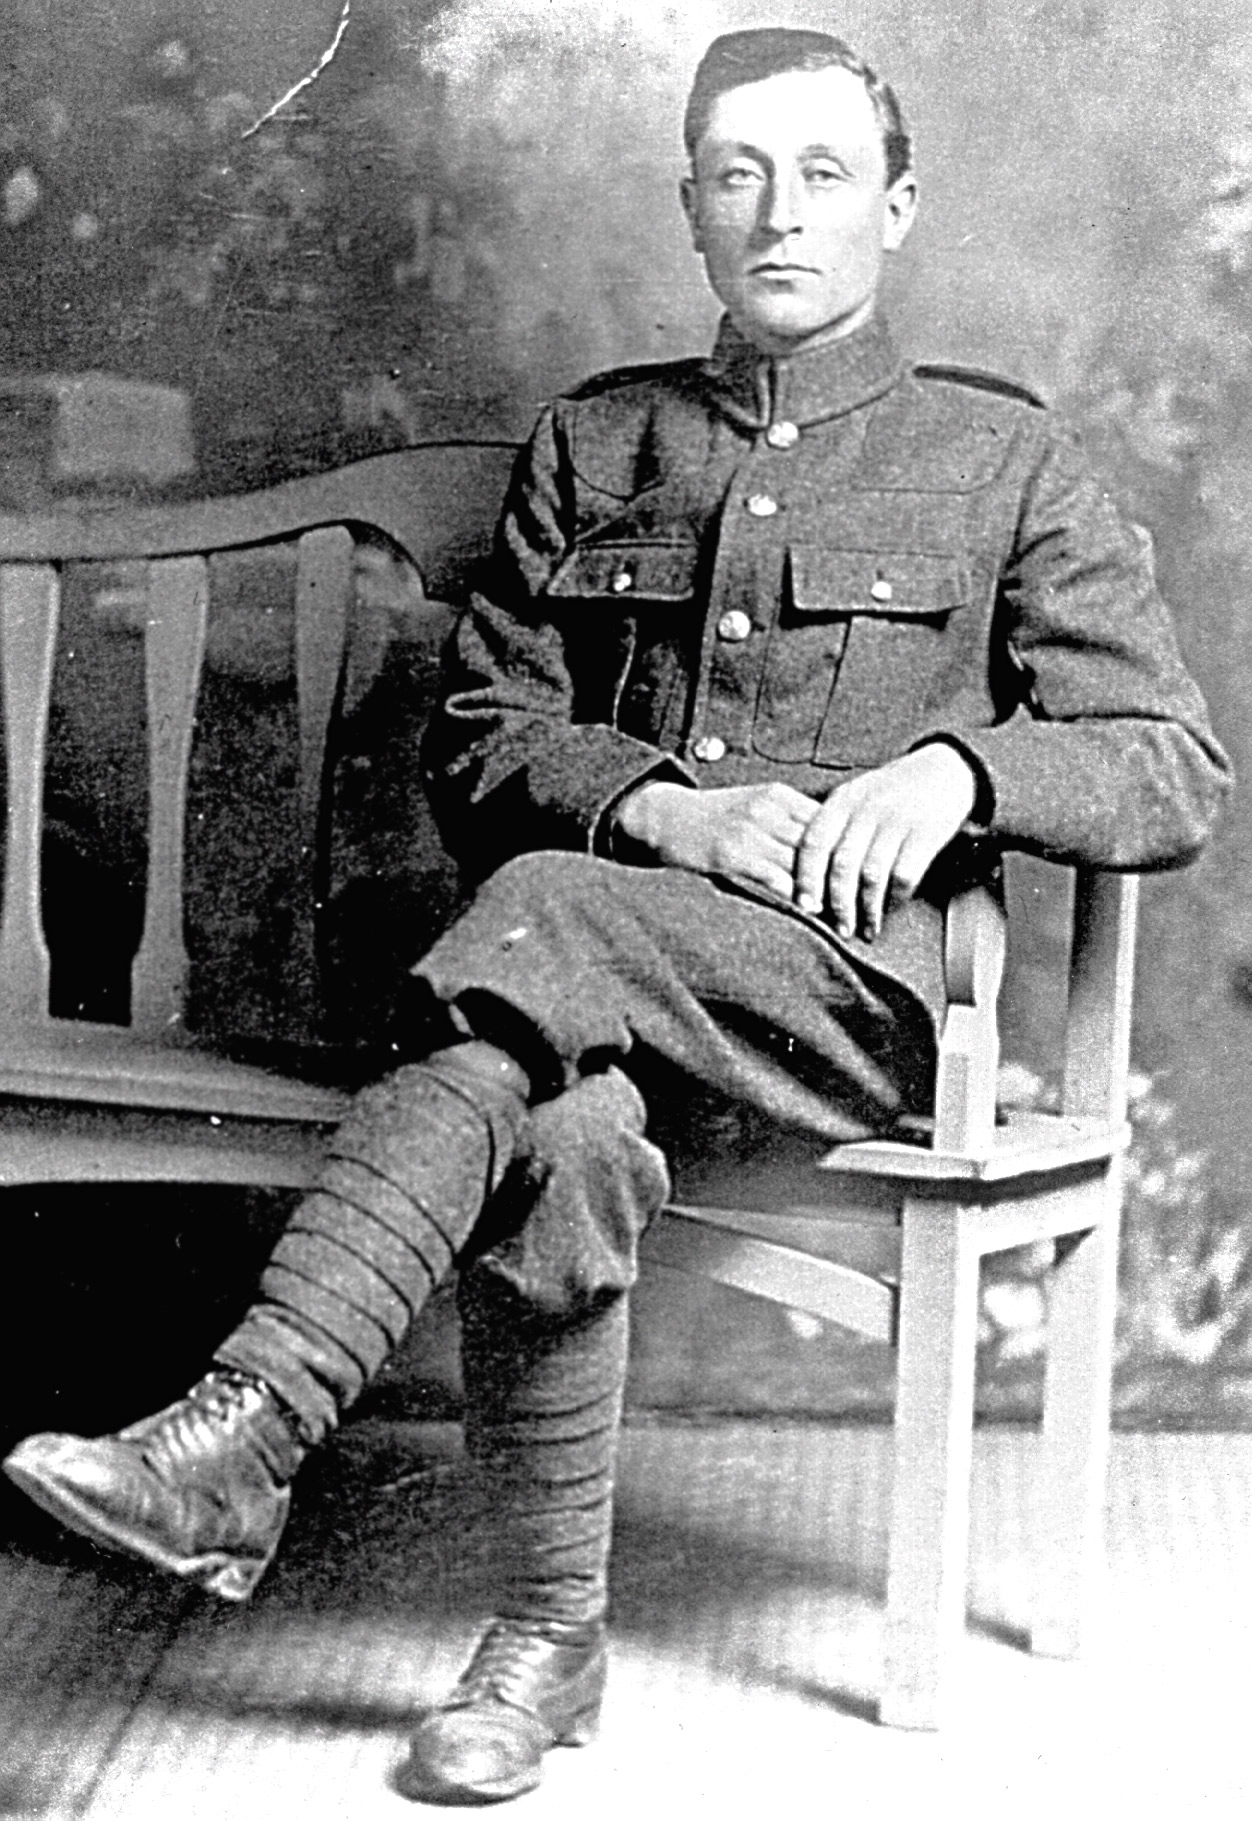 Archibald Sheppard, Newfoundland Forestry Corps, n.d.